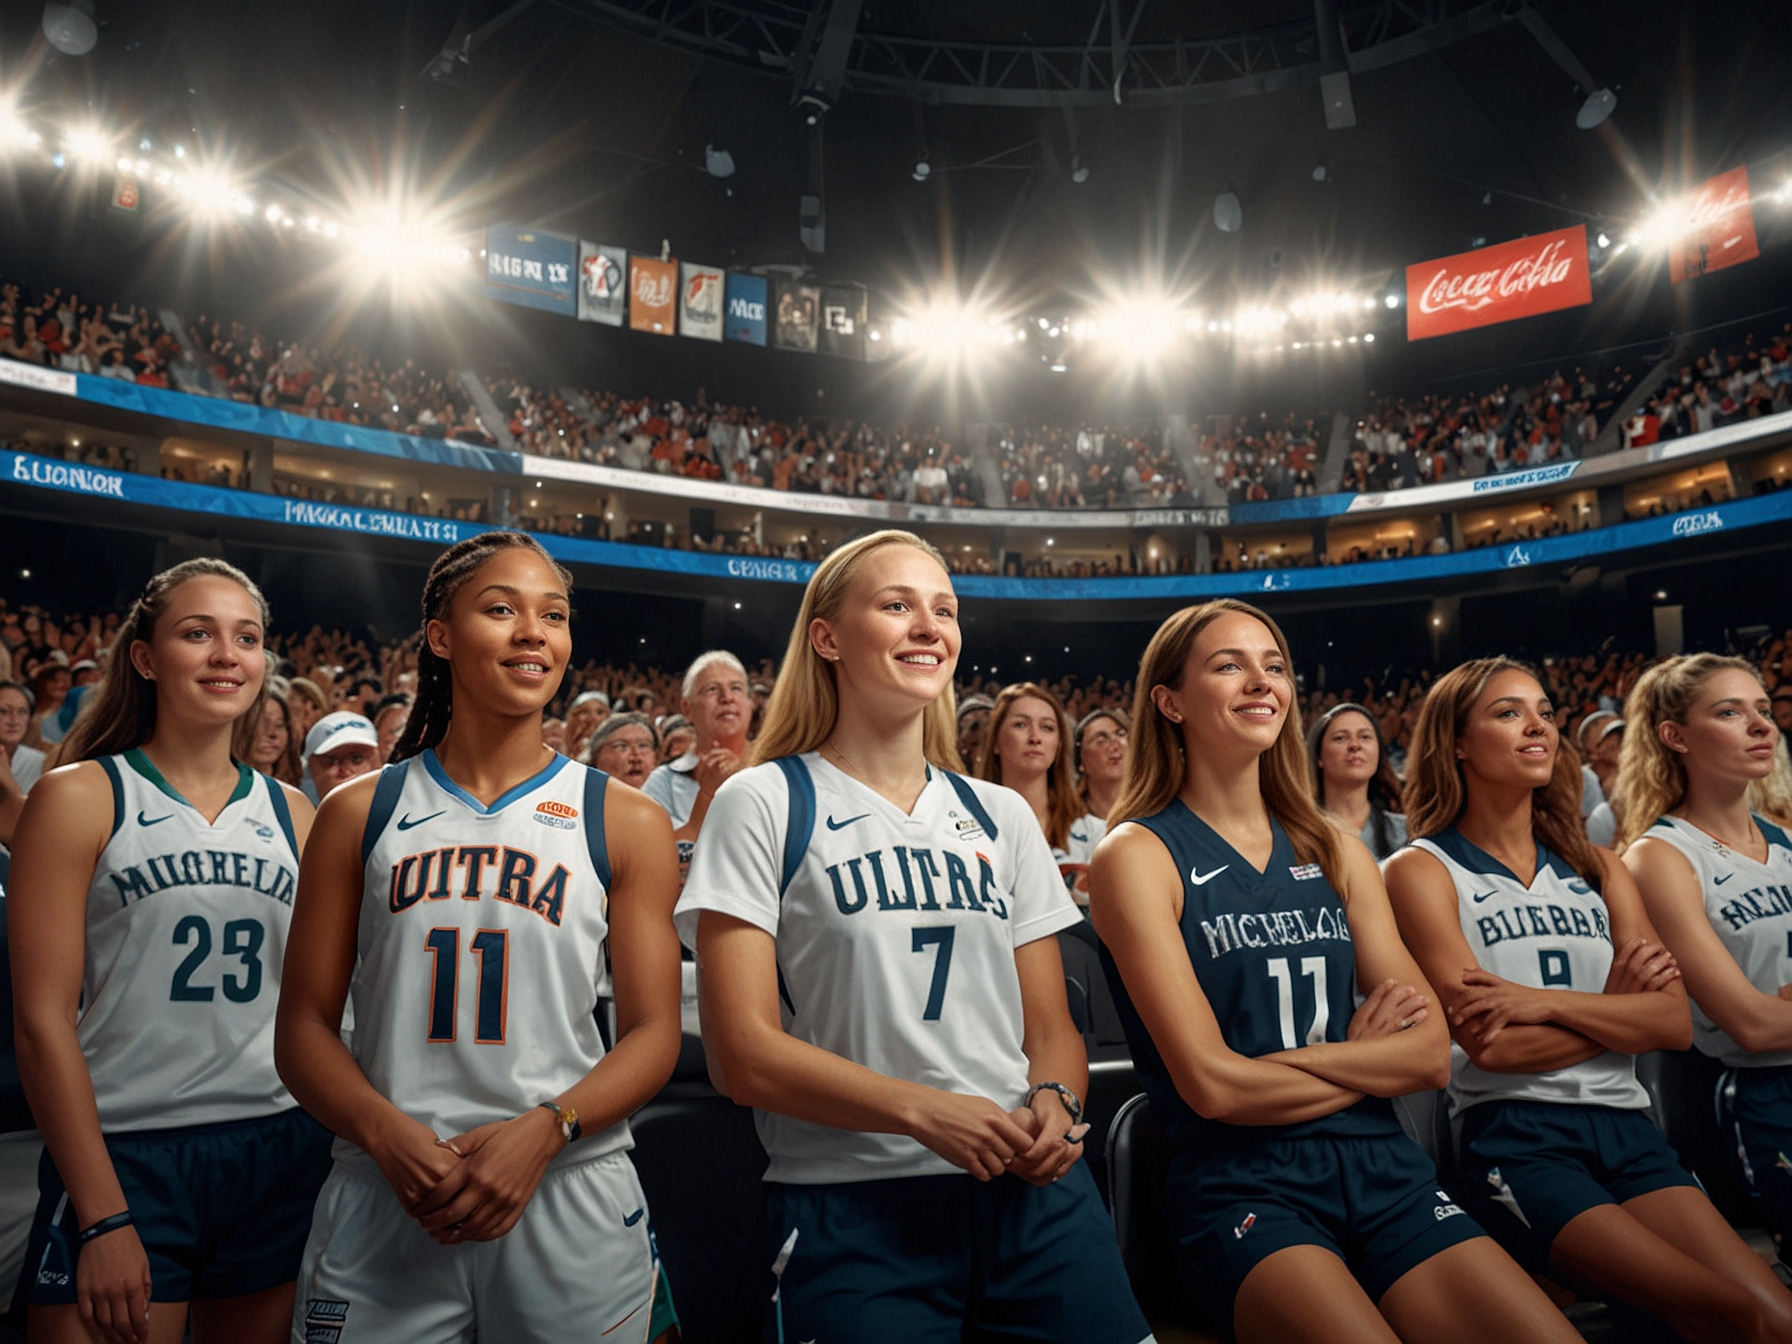 Fans at Michelob Ultra Arena showing support for their teams during the heated WNBA finals rematch.